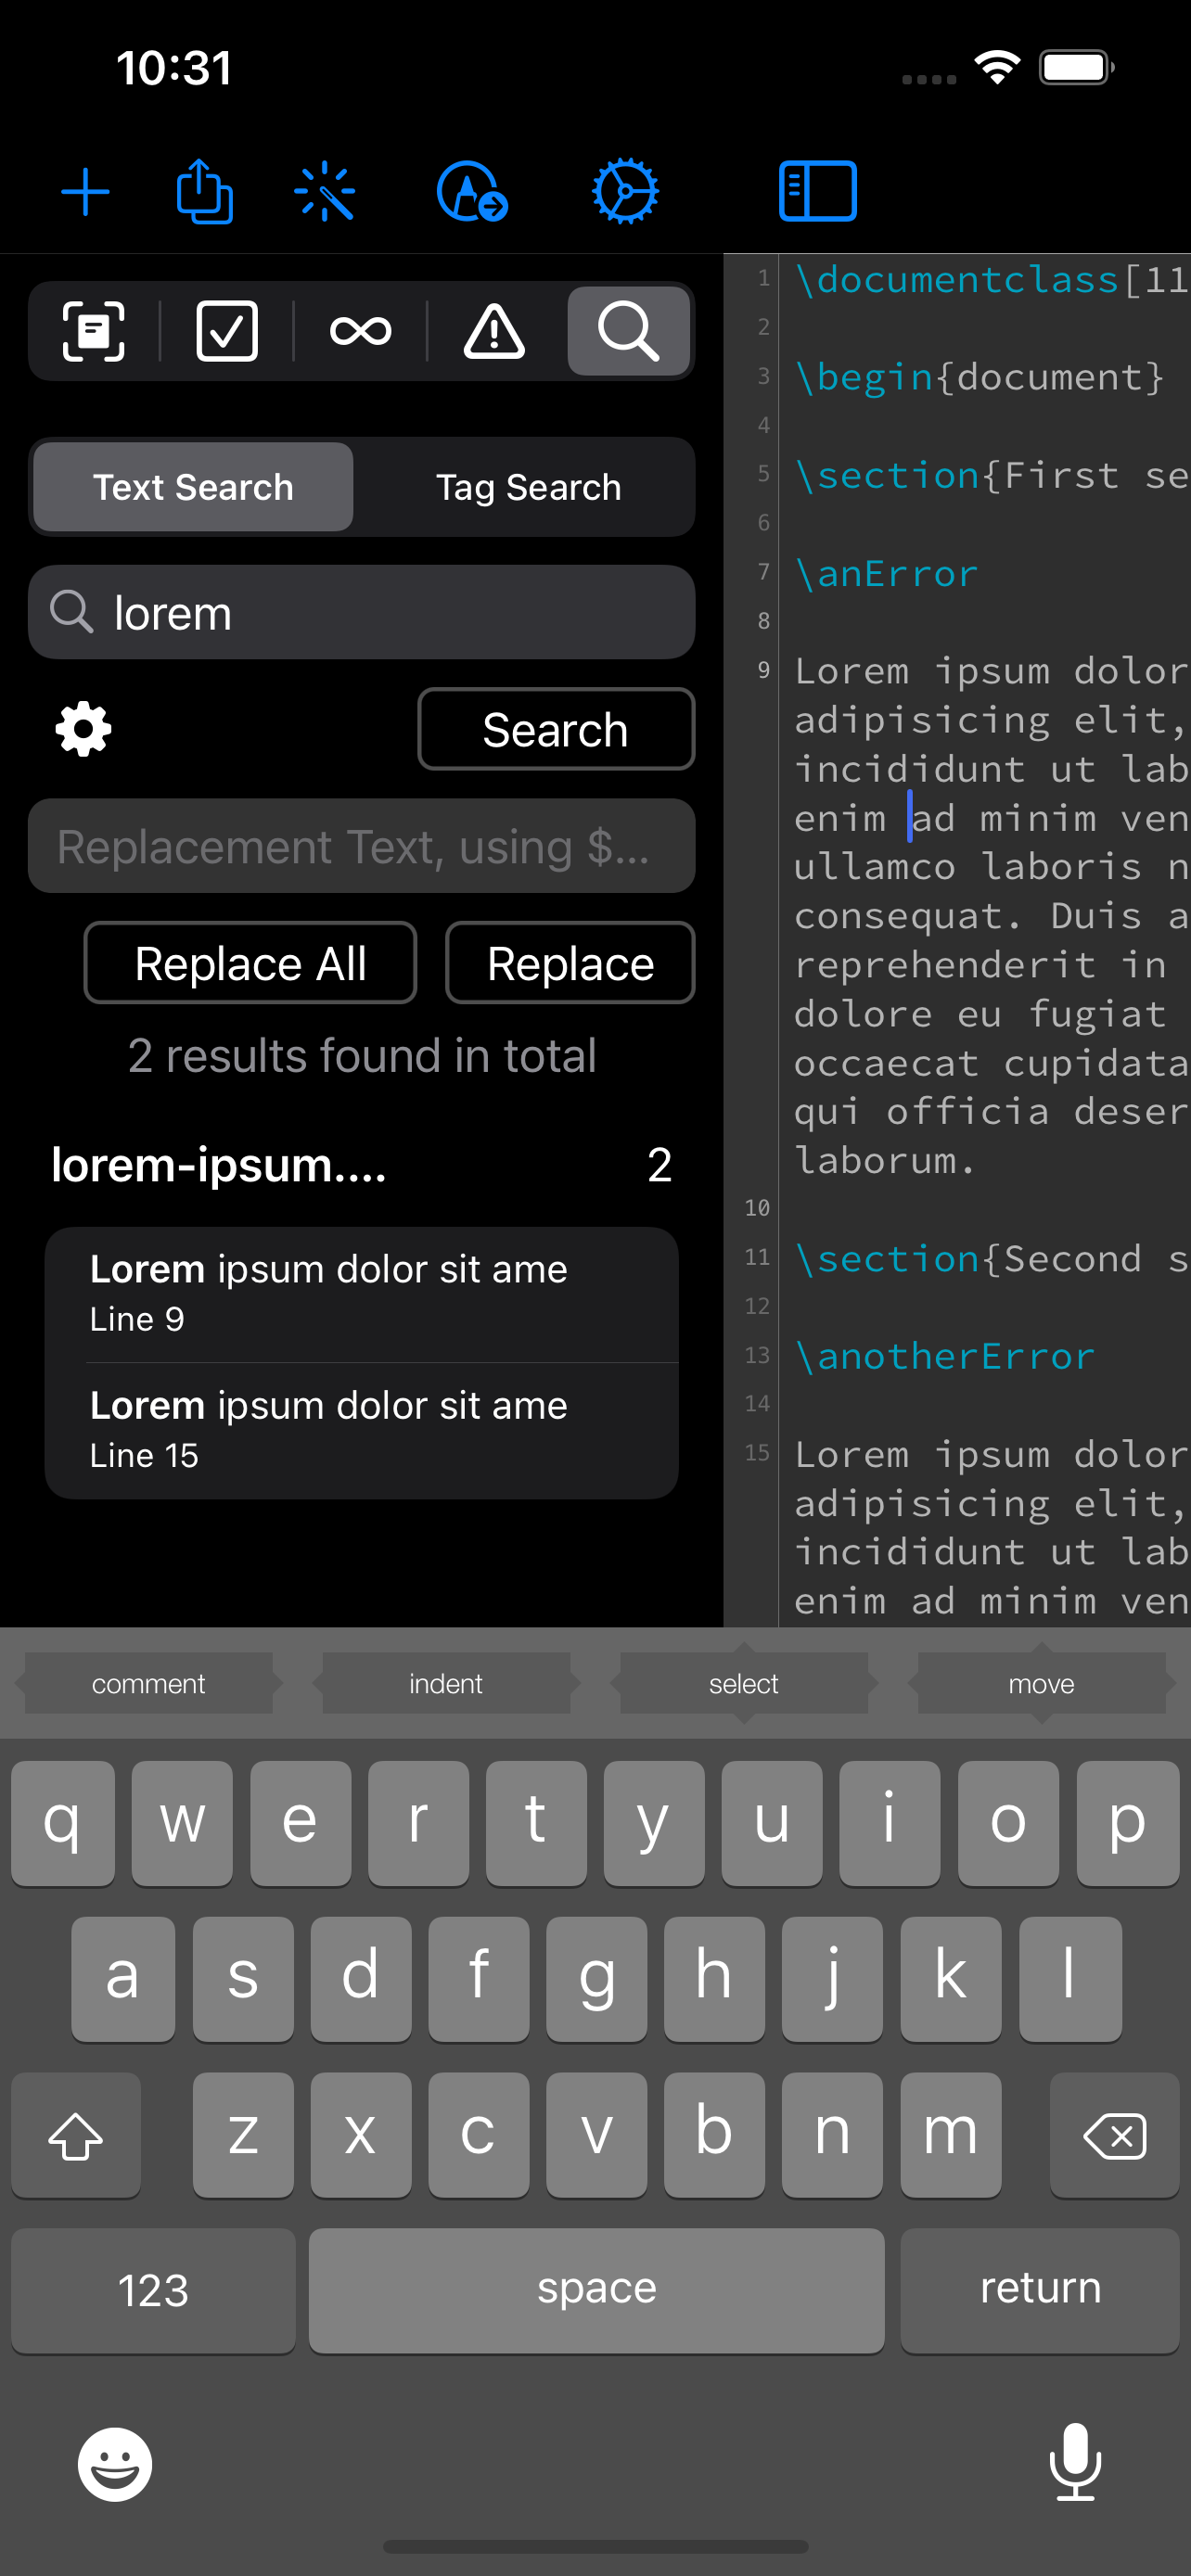 docs/apps/workspace/sidebar/search/text-search_ios_iphone_dark-mode.png